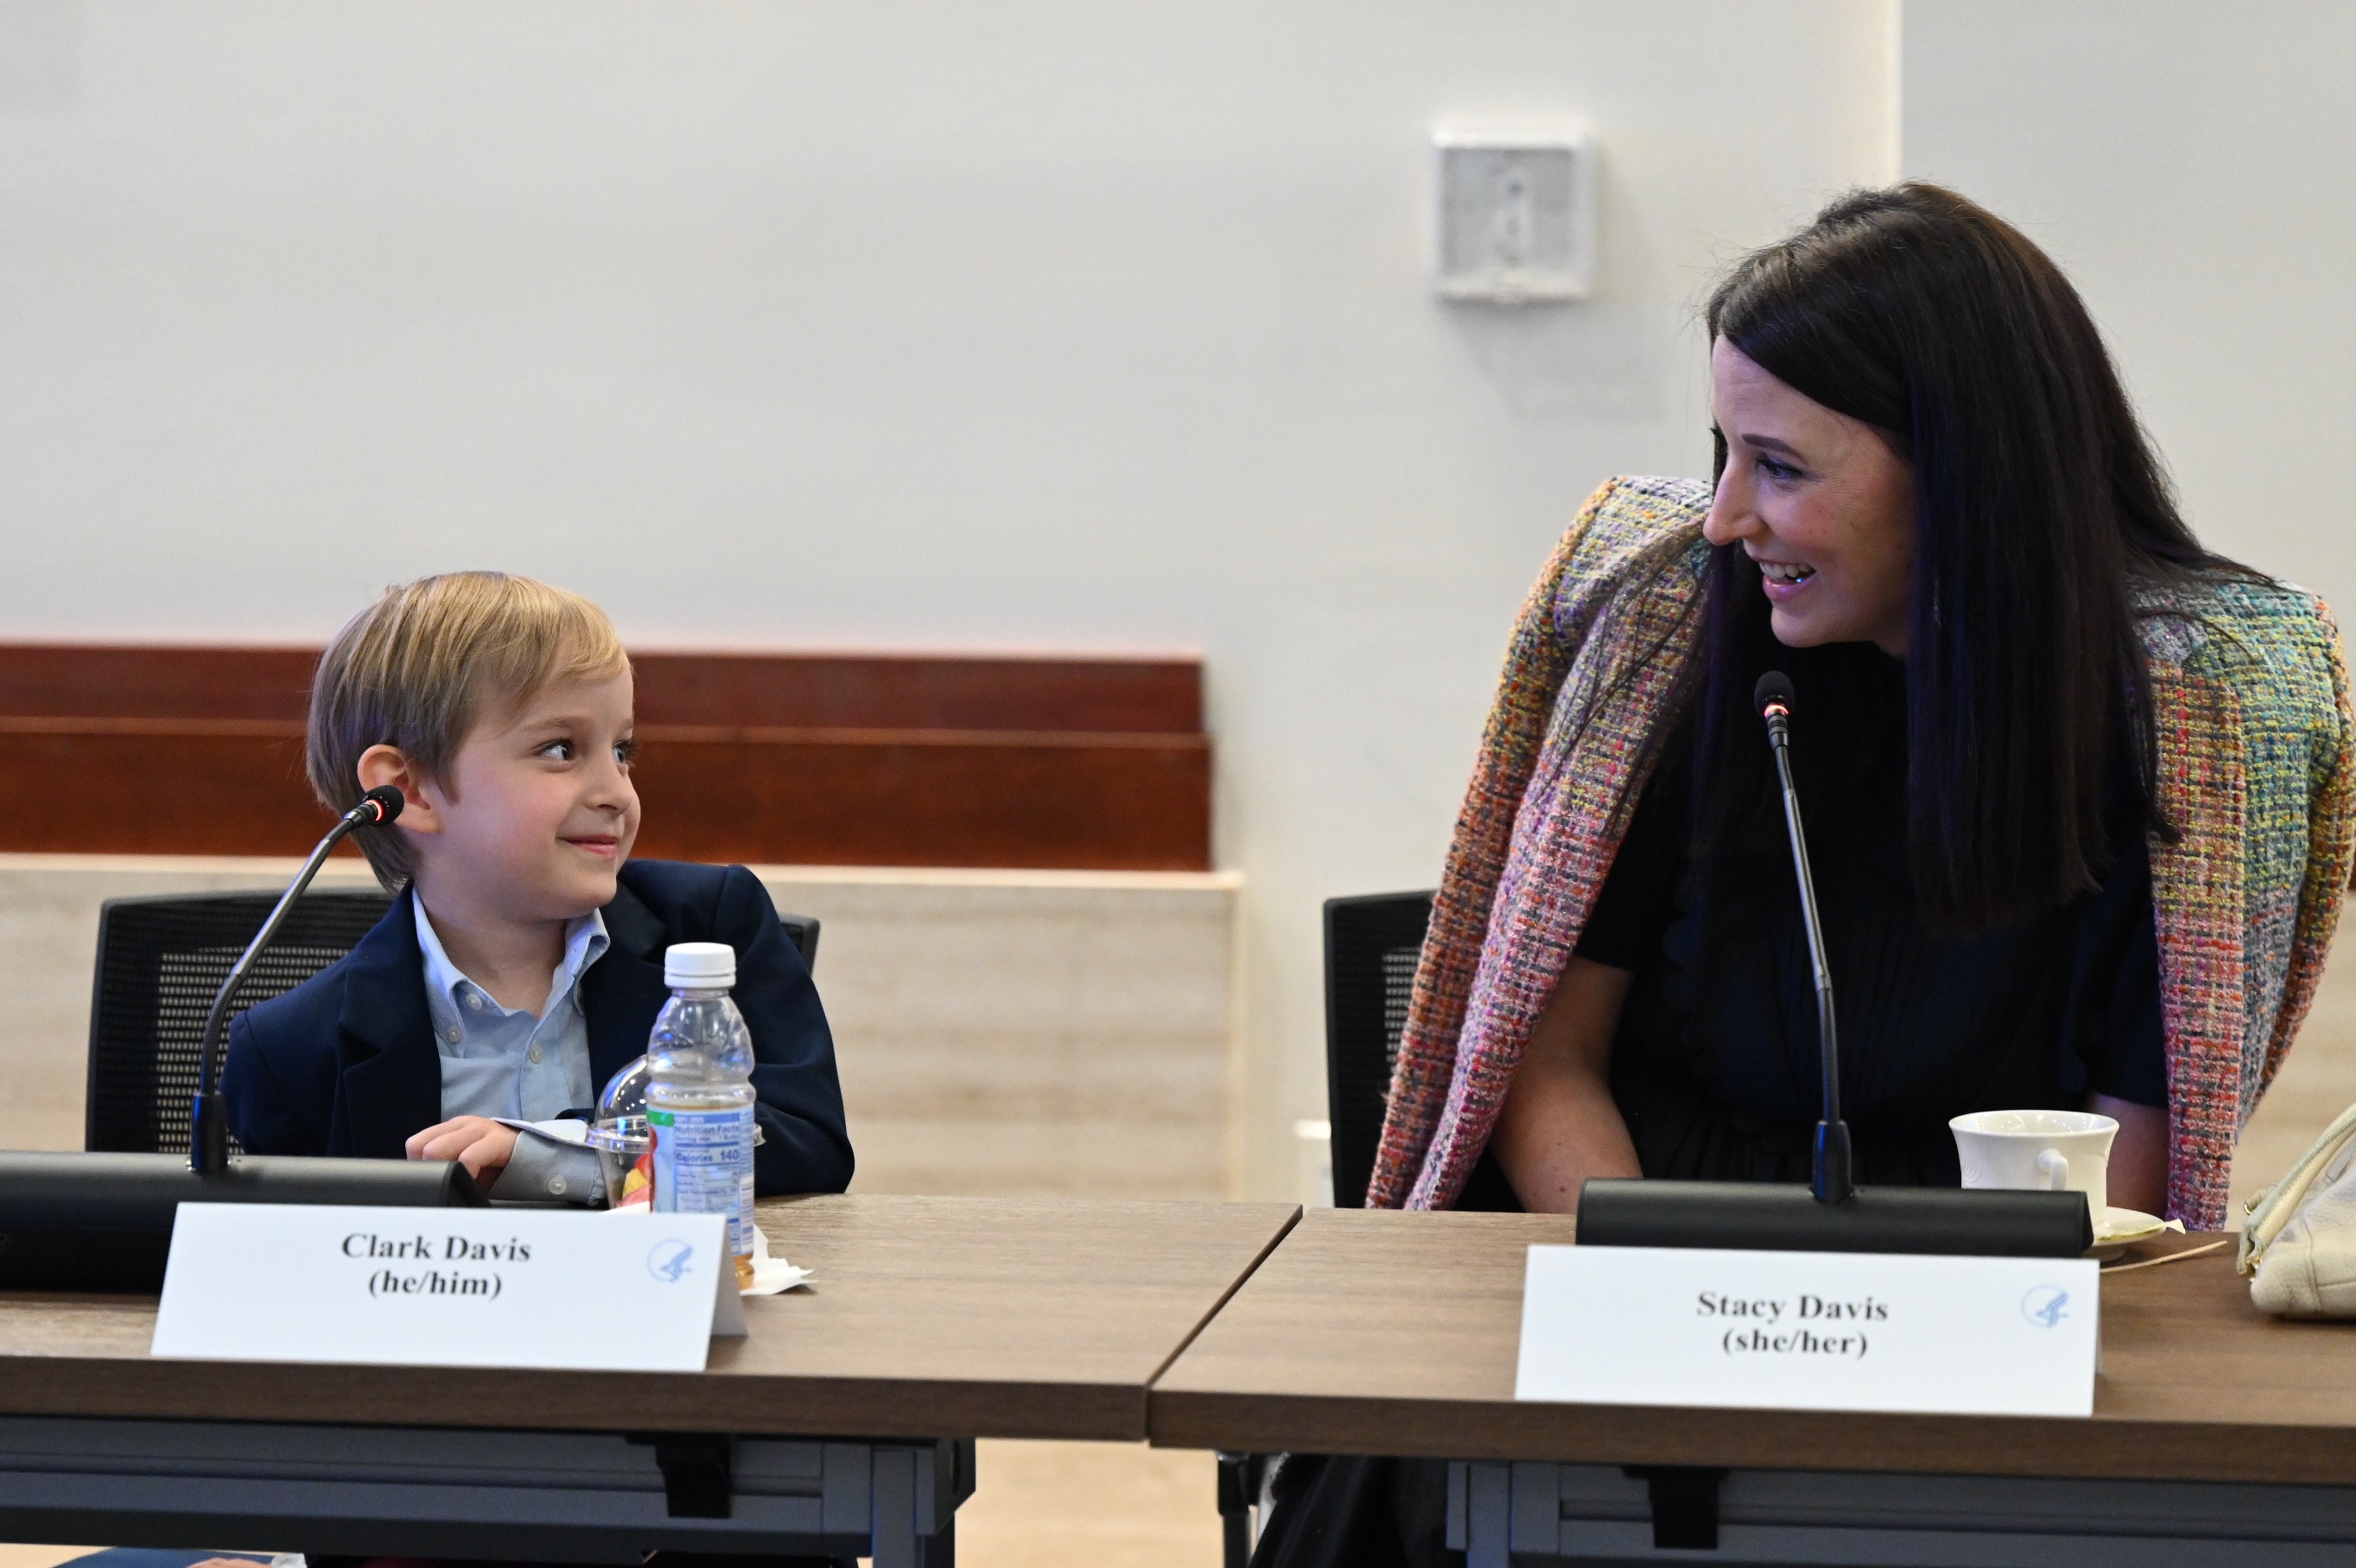 Young child smiling looking towards parent in front of microphones during round table event